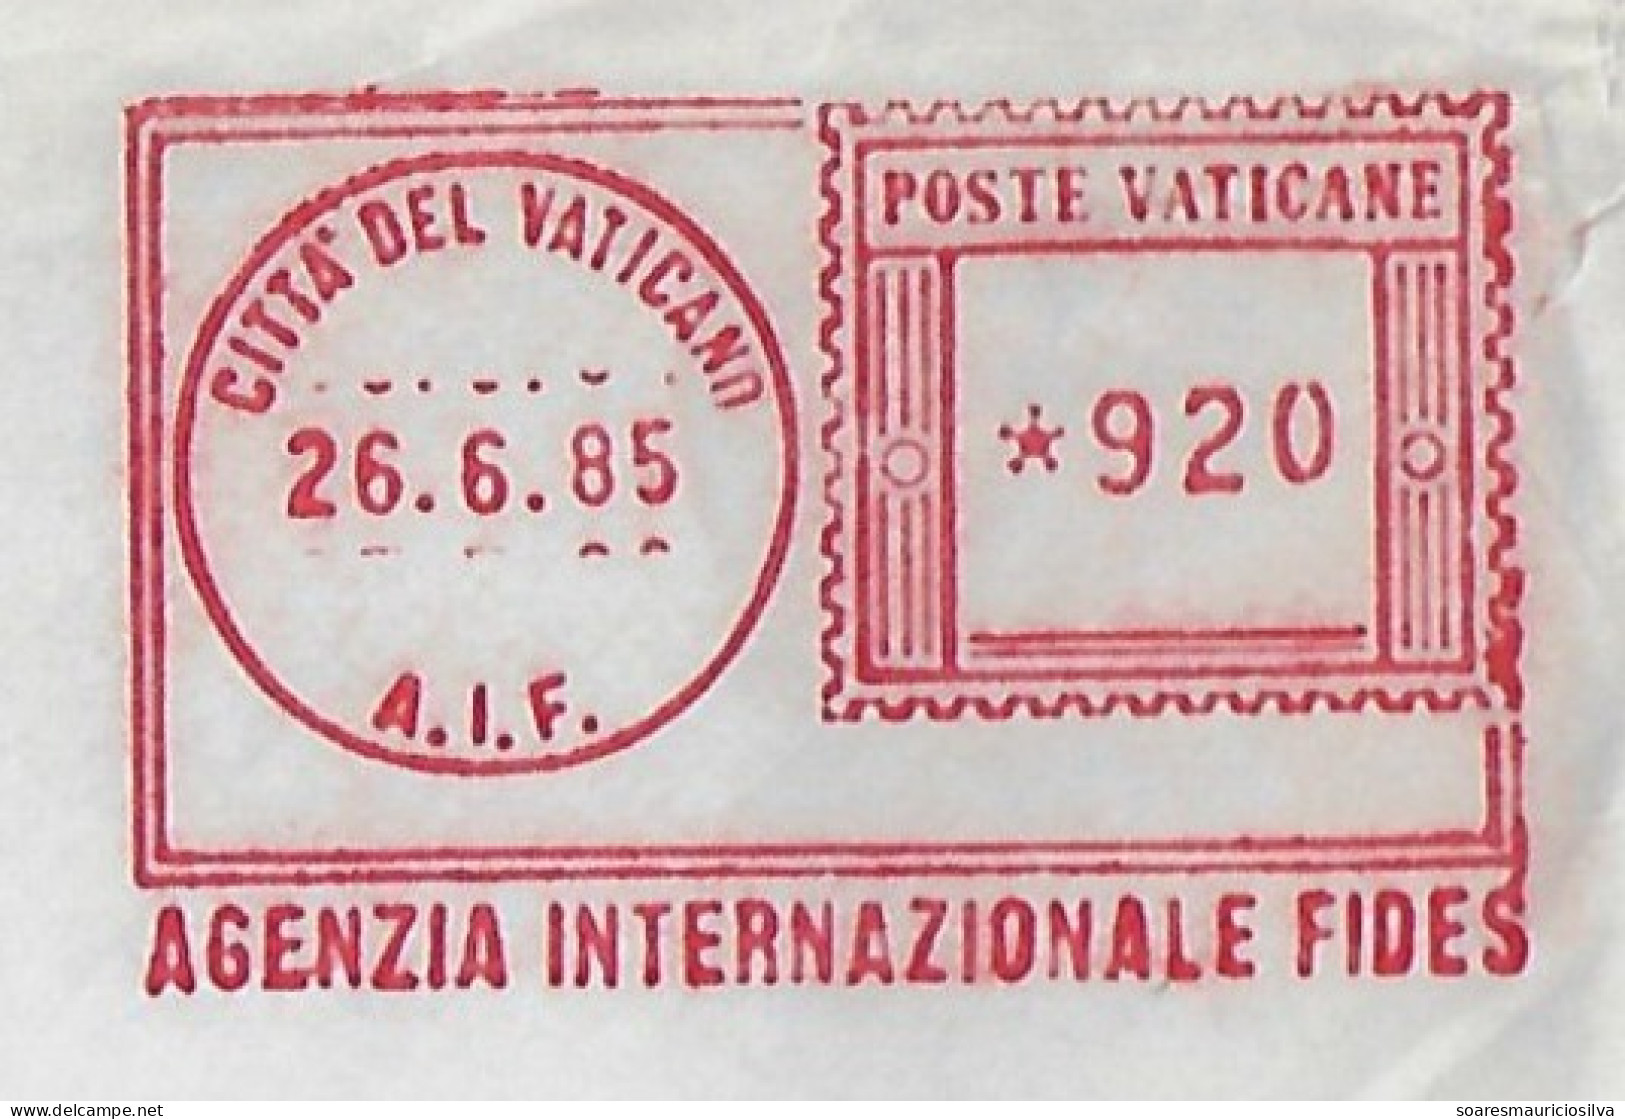 Vatican 1985 Cover Sent To Brazil With Meter Stamp Lirma Slogan Agenzia Internazionale Fides International Faith Agency - Covers & Documents